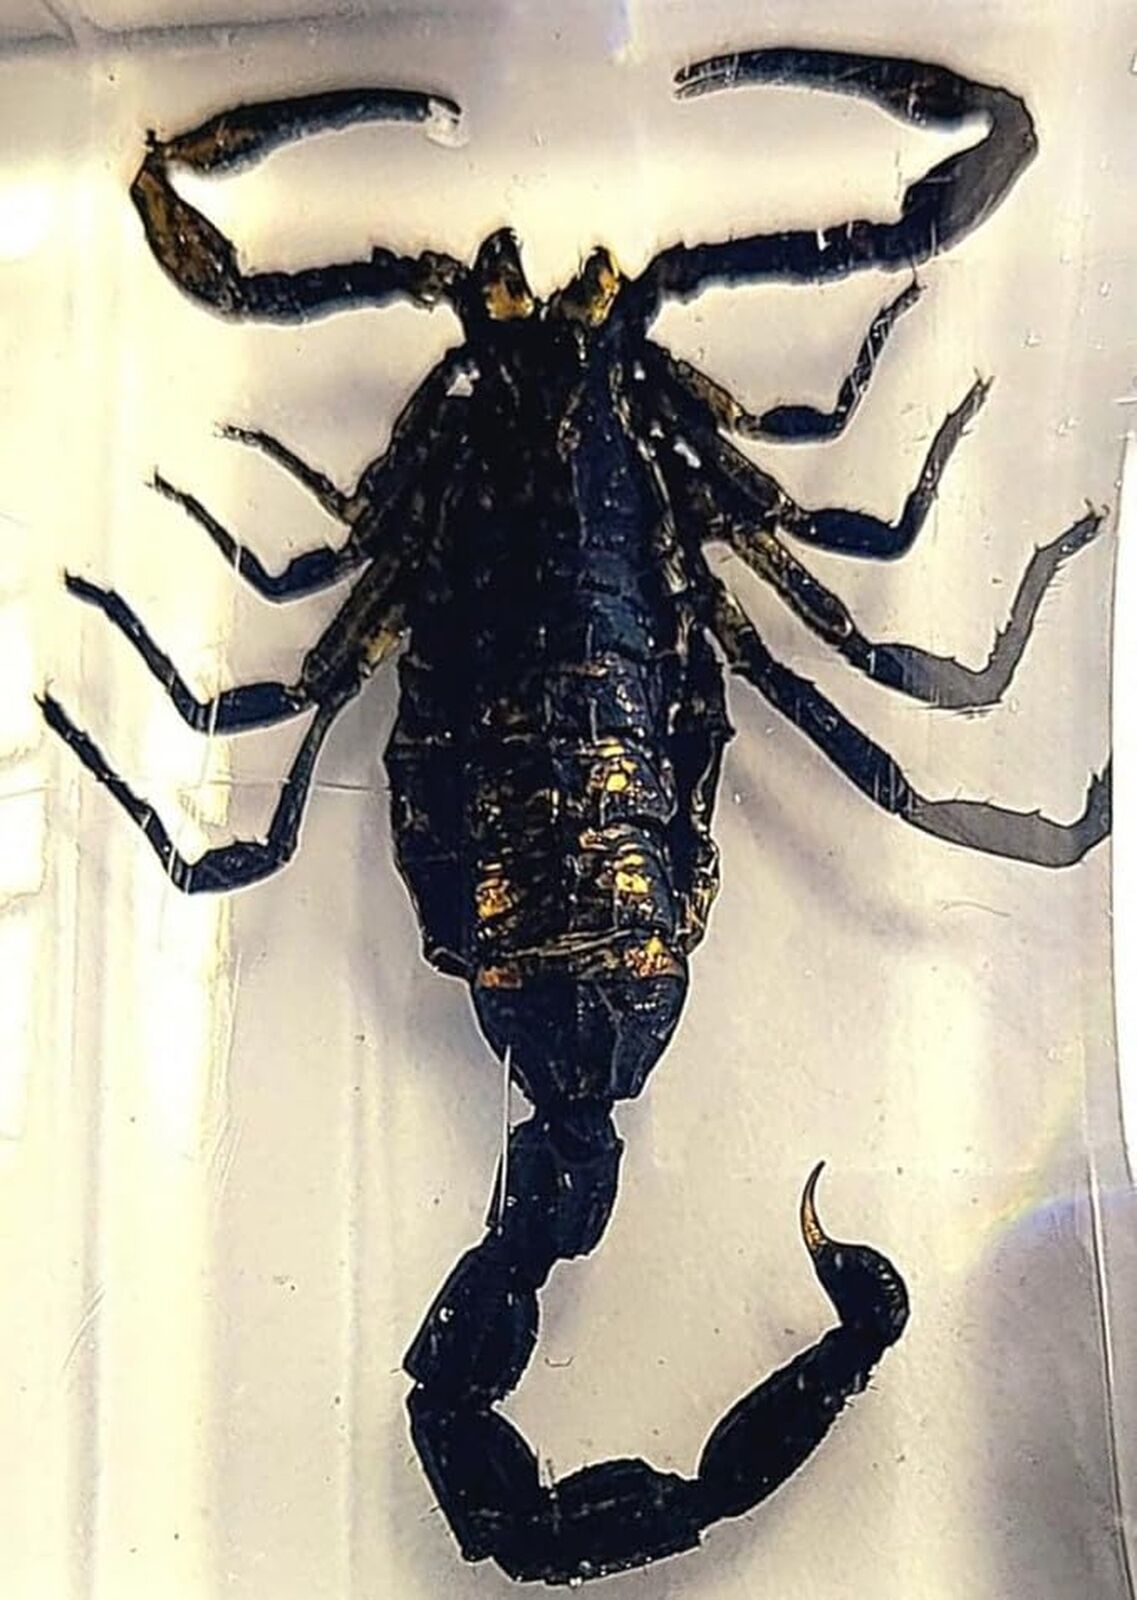 44mm Real Black Scorpion in Crystal Clear Lucite Resin Crafts Specimen Preser...